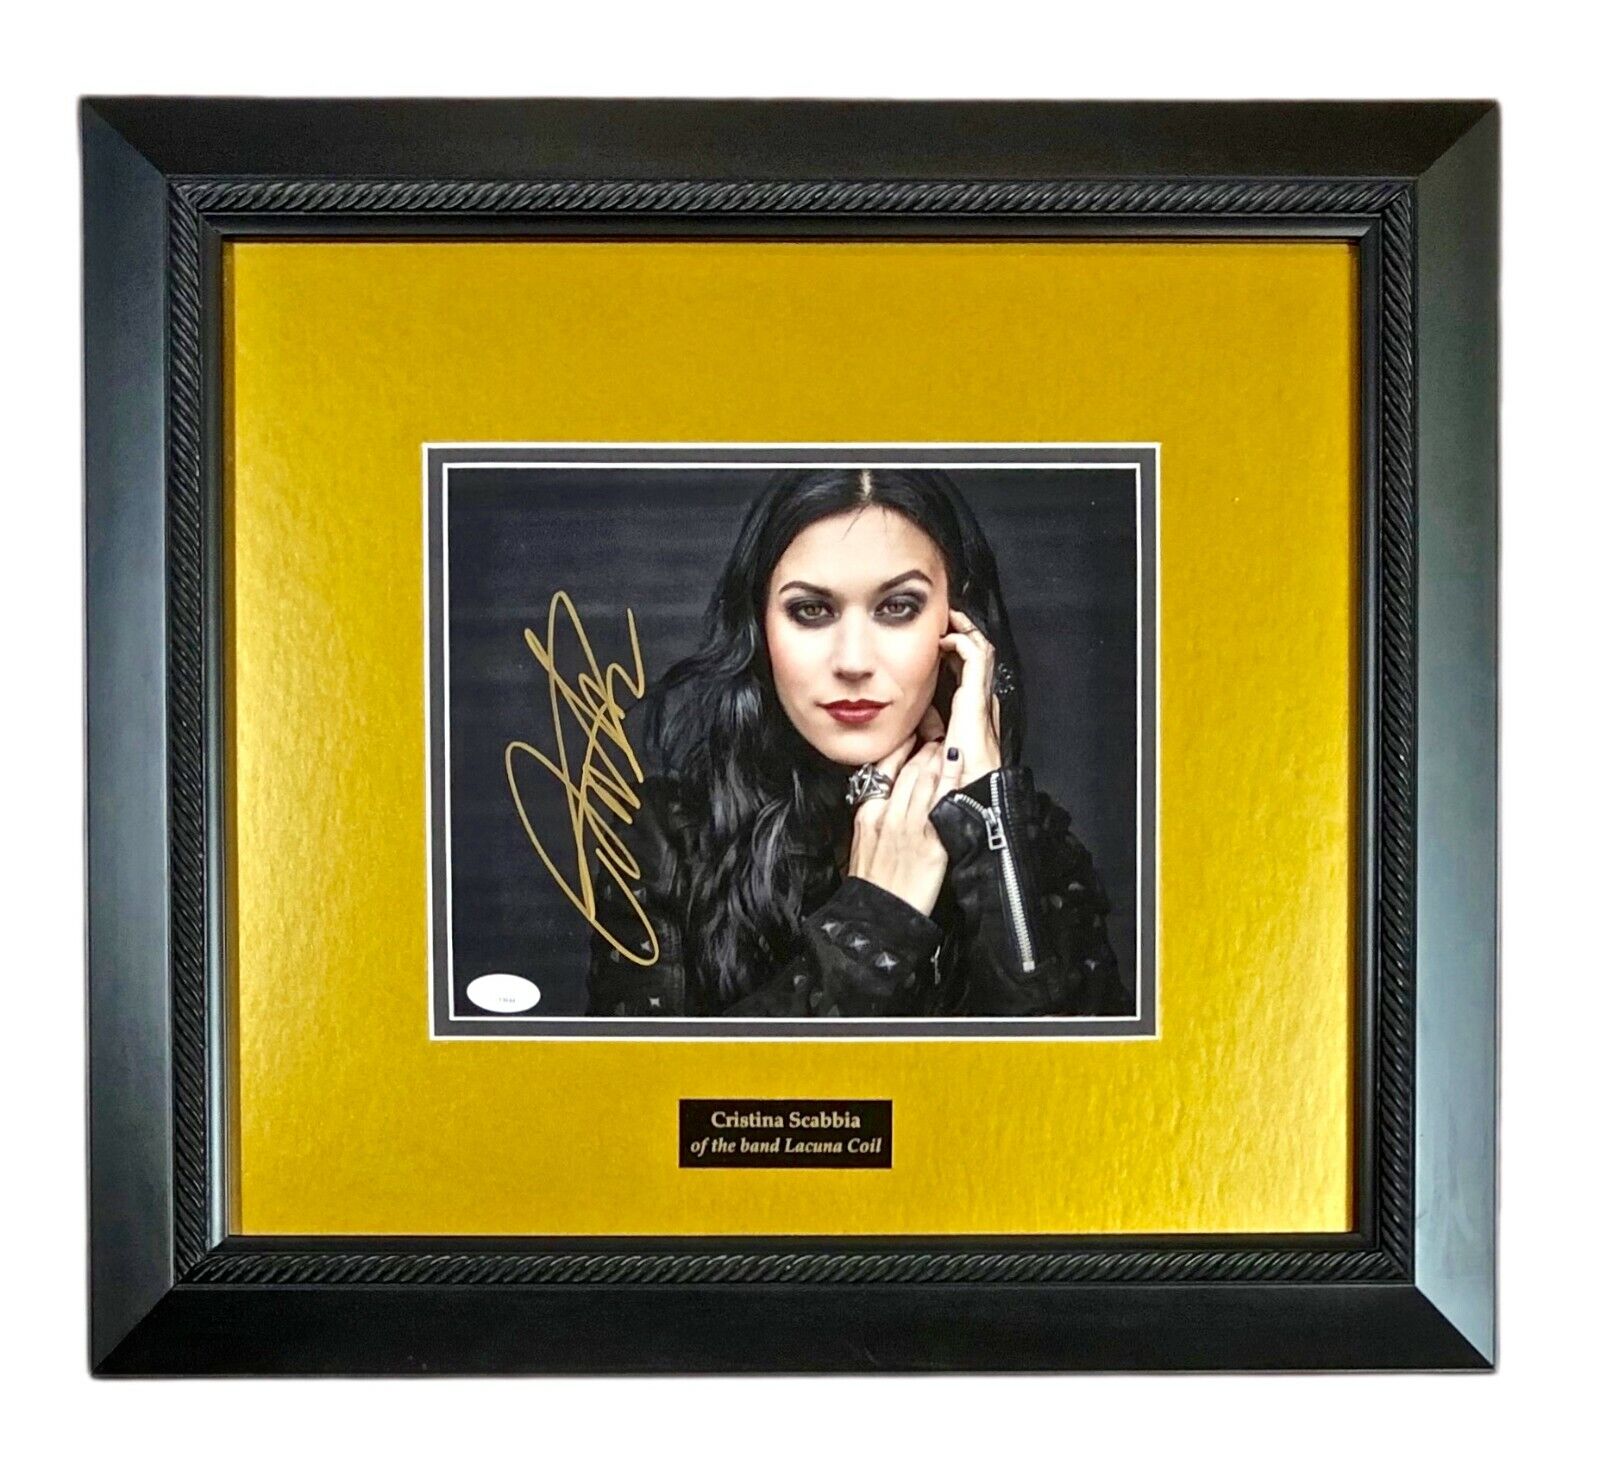 CRISTINA SCABBIA Autographed Hand SIGNED 8x10 Photo Poster painting FRAMED LACUNA COIL BAND JSA